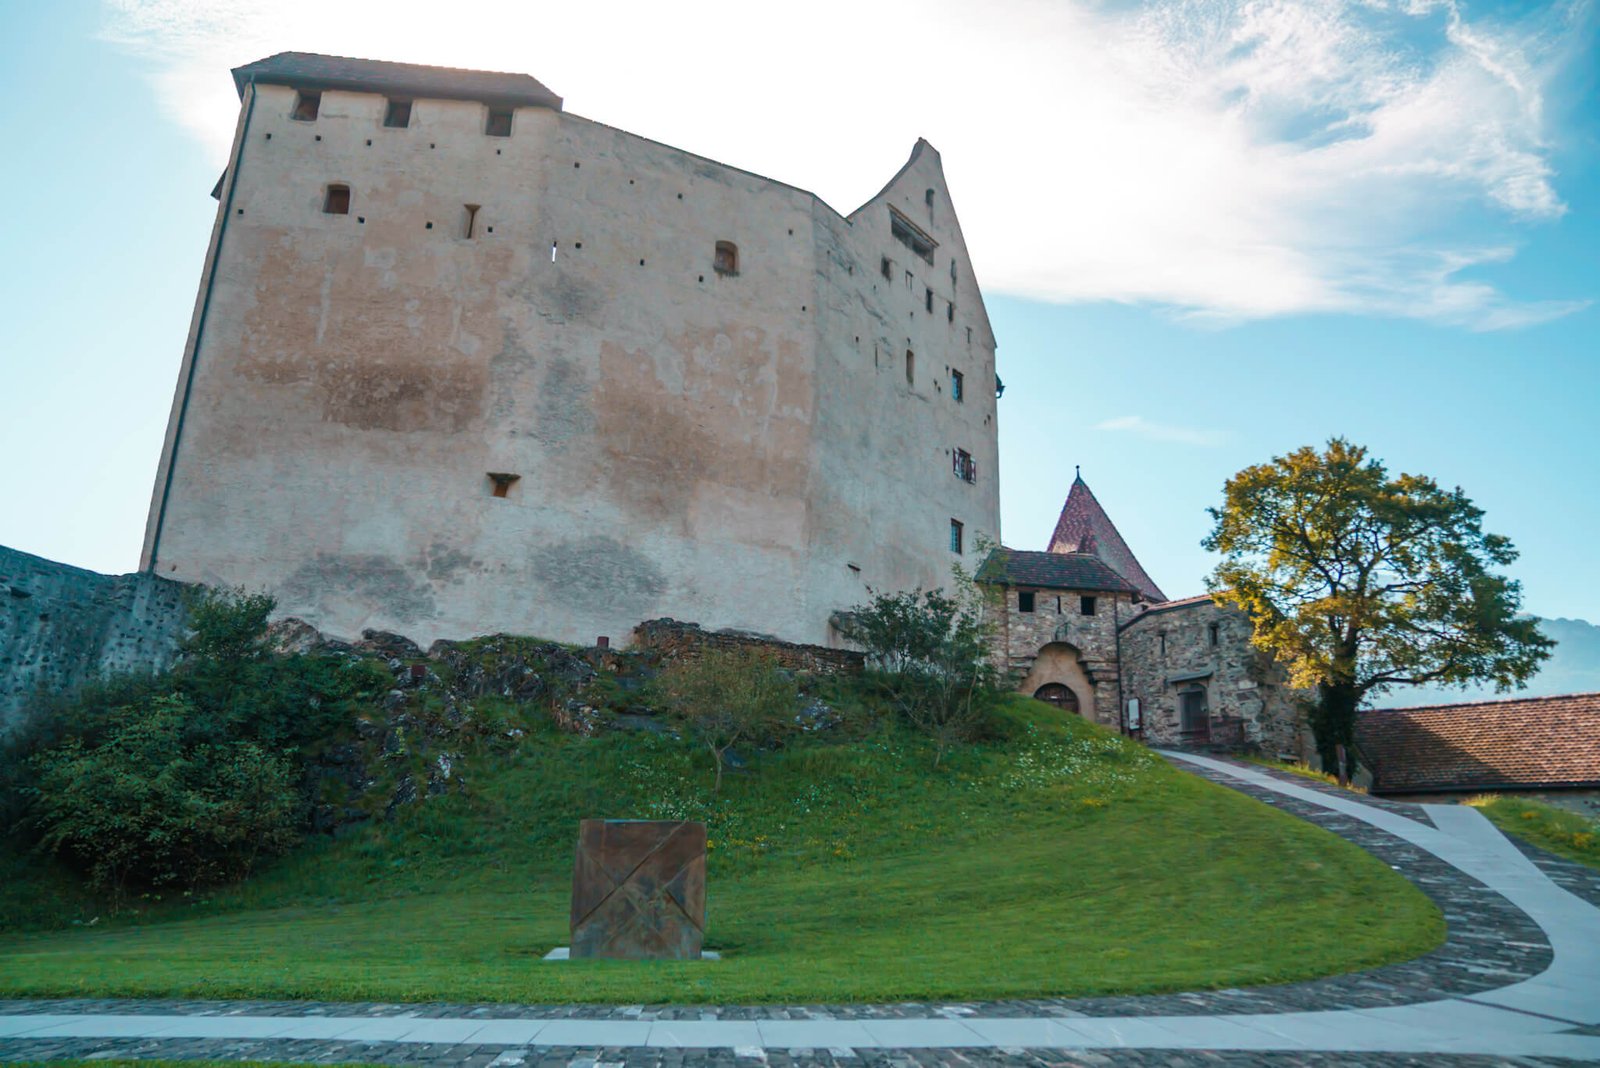 Gutenberg Castle, things to see while visiting Liechtenstein